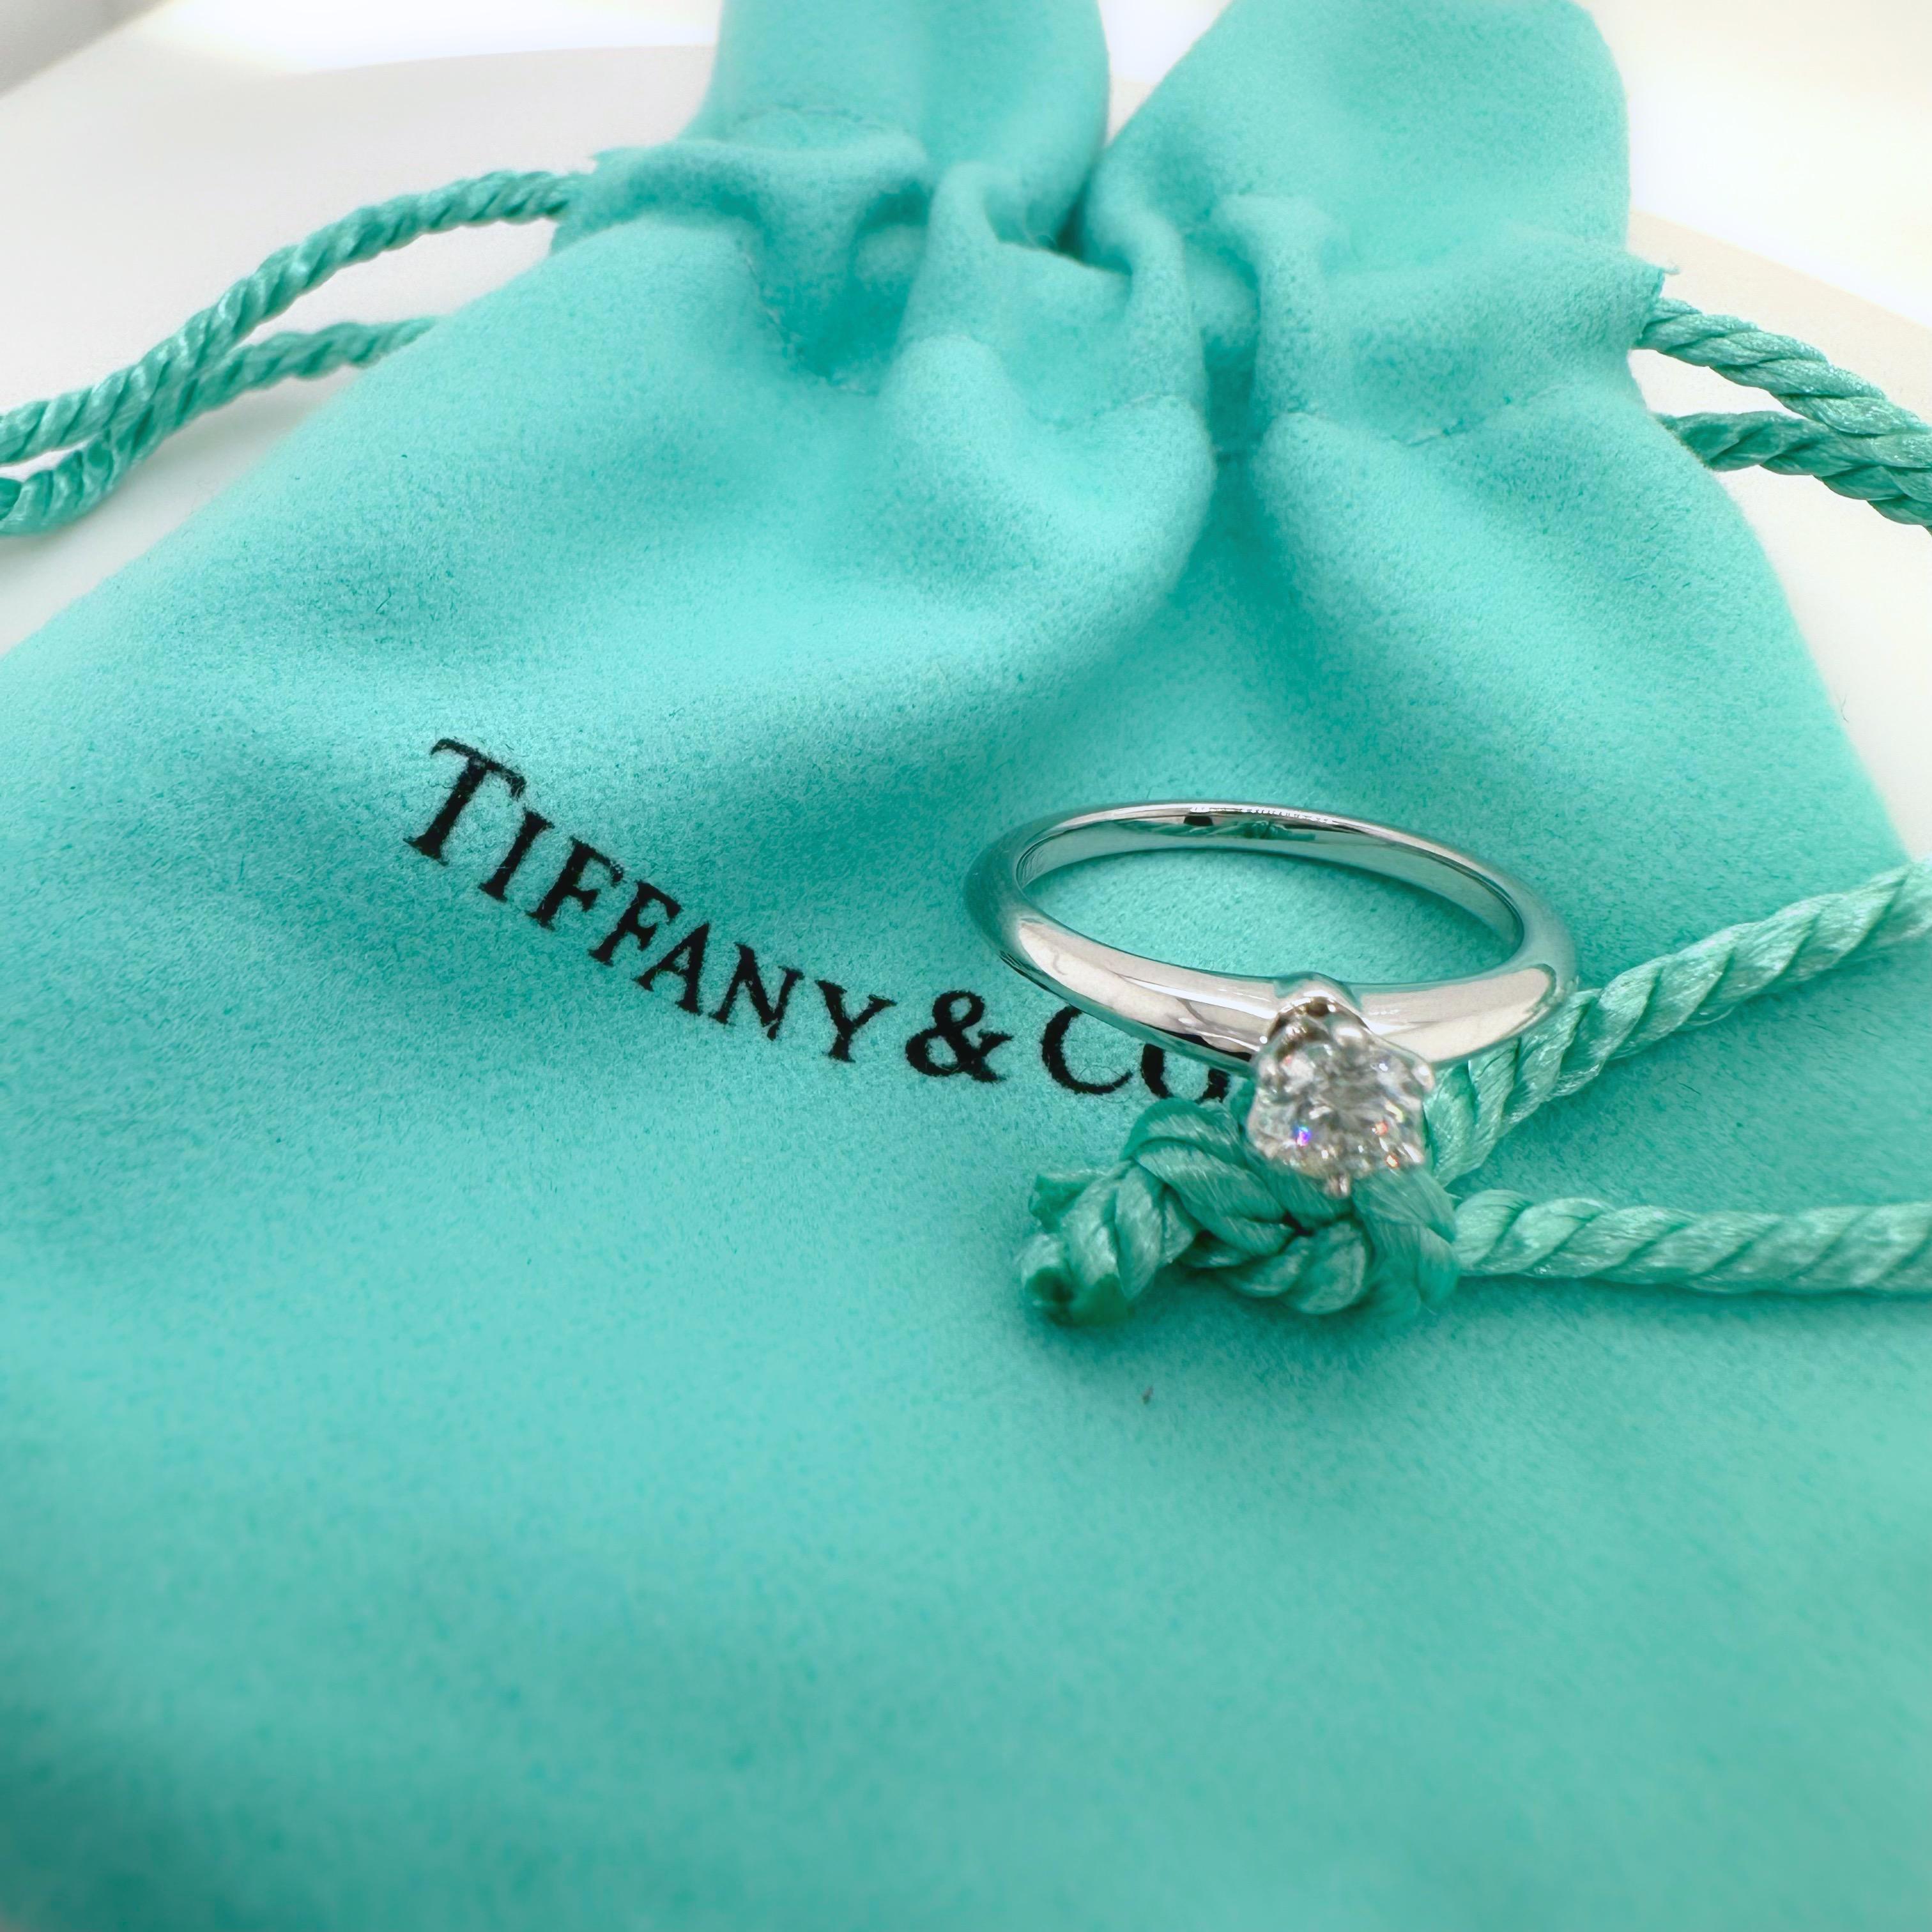 Tiffany & Co. Tiffany Setting Round Diamond Engagement Ring
Style:  Solitaire
Ref. number:  T89554
Metal:  Platinum
Size:  3.5 sizable
Measurements:  2 mm
Main Diamond:  0.21 cts
Color & Clarity:  E, VS1
Hallmark:  ©TIFFANY&CO. PT950 T89554